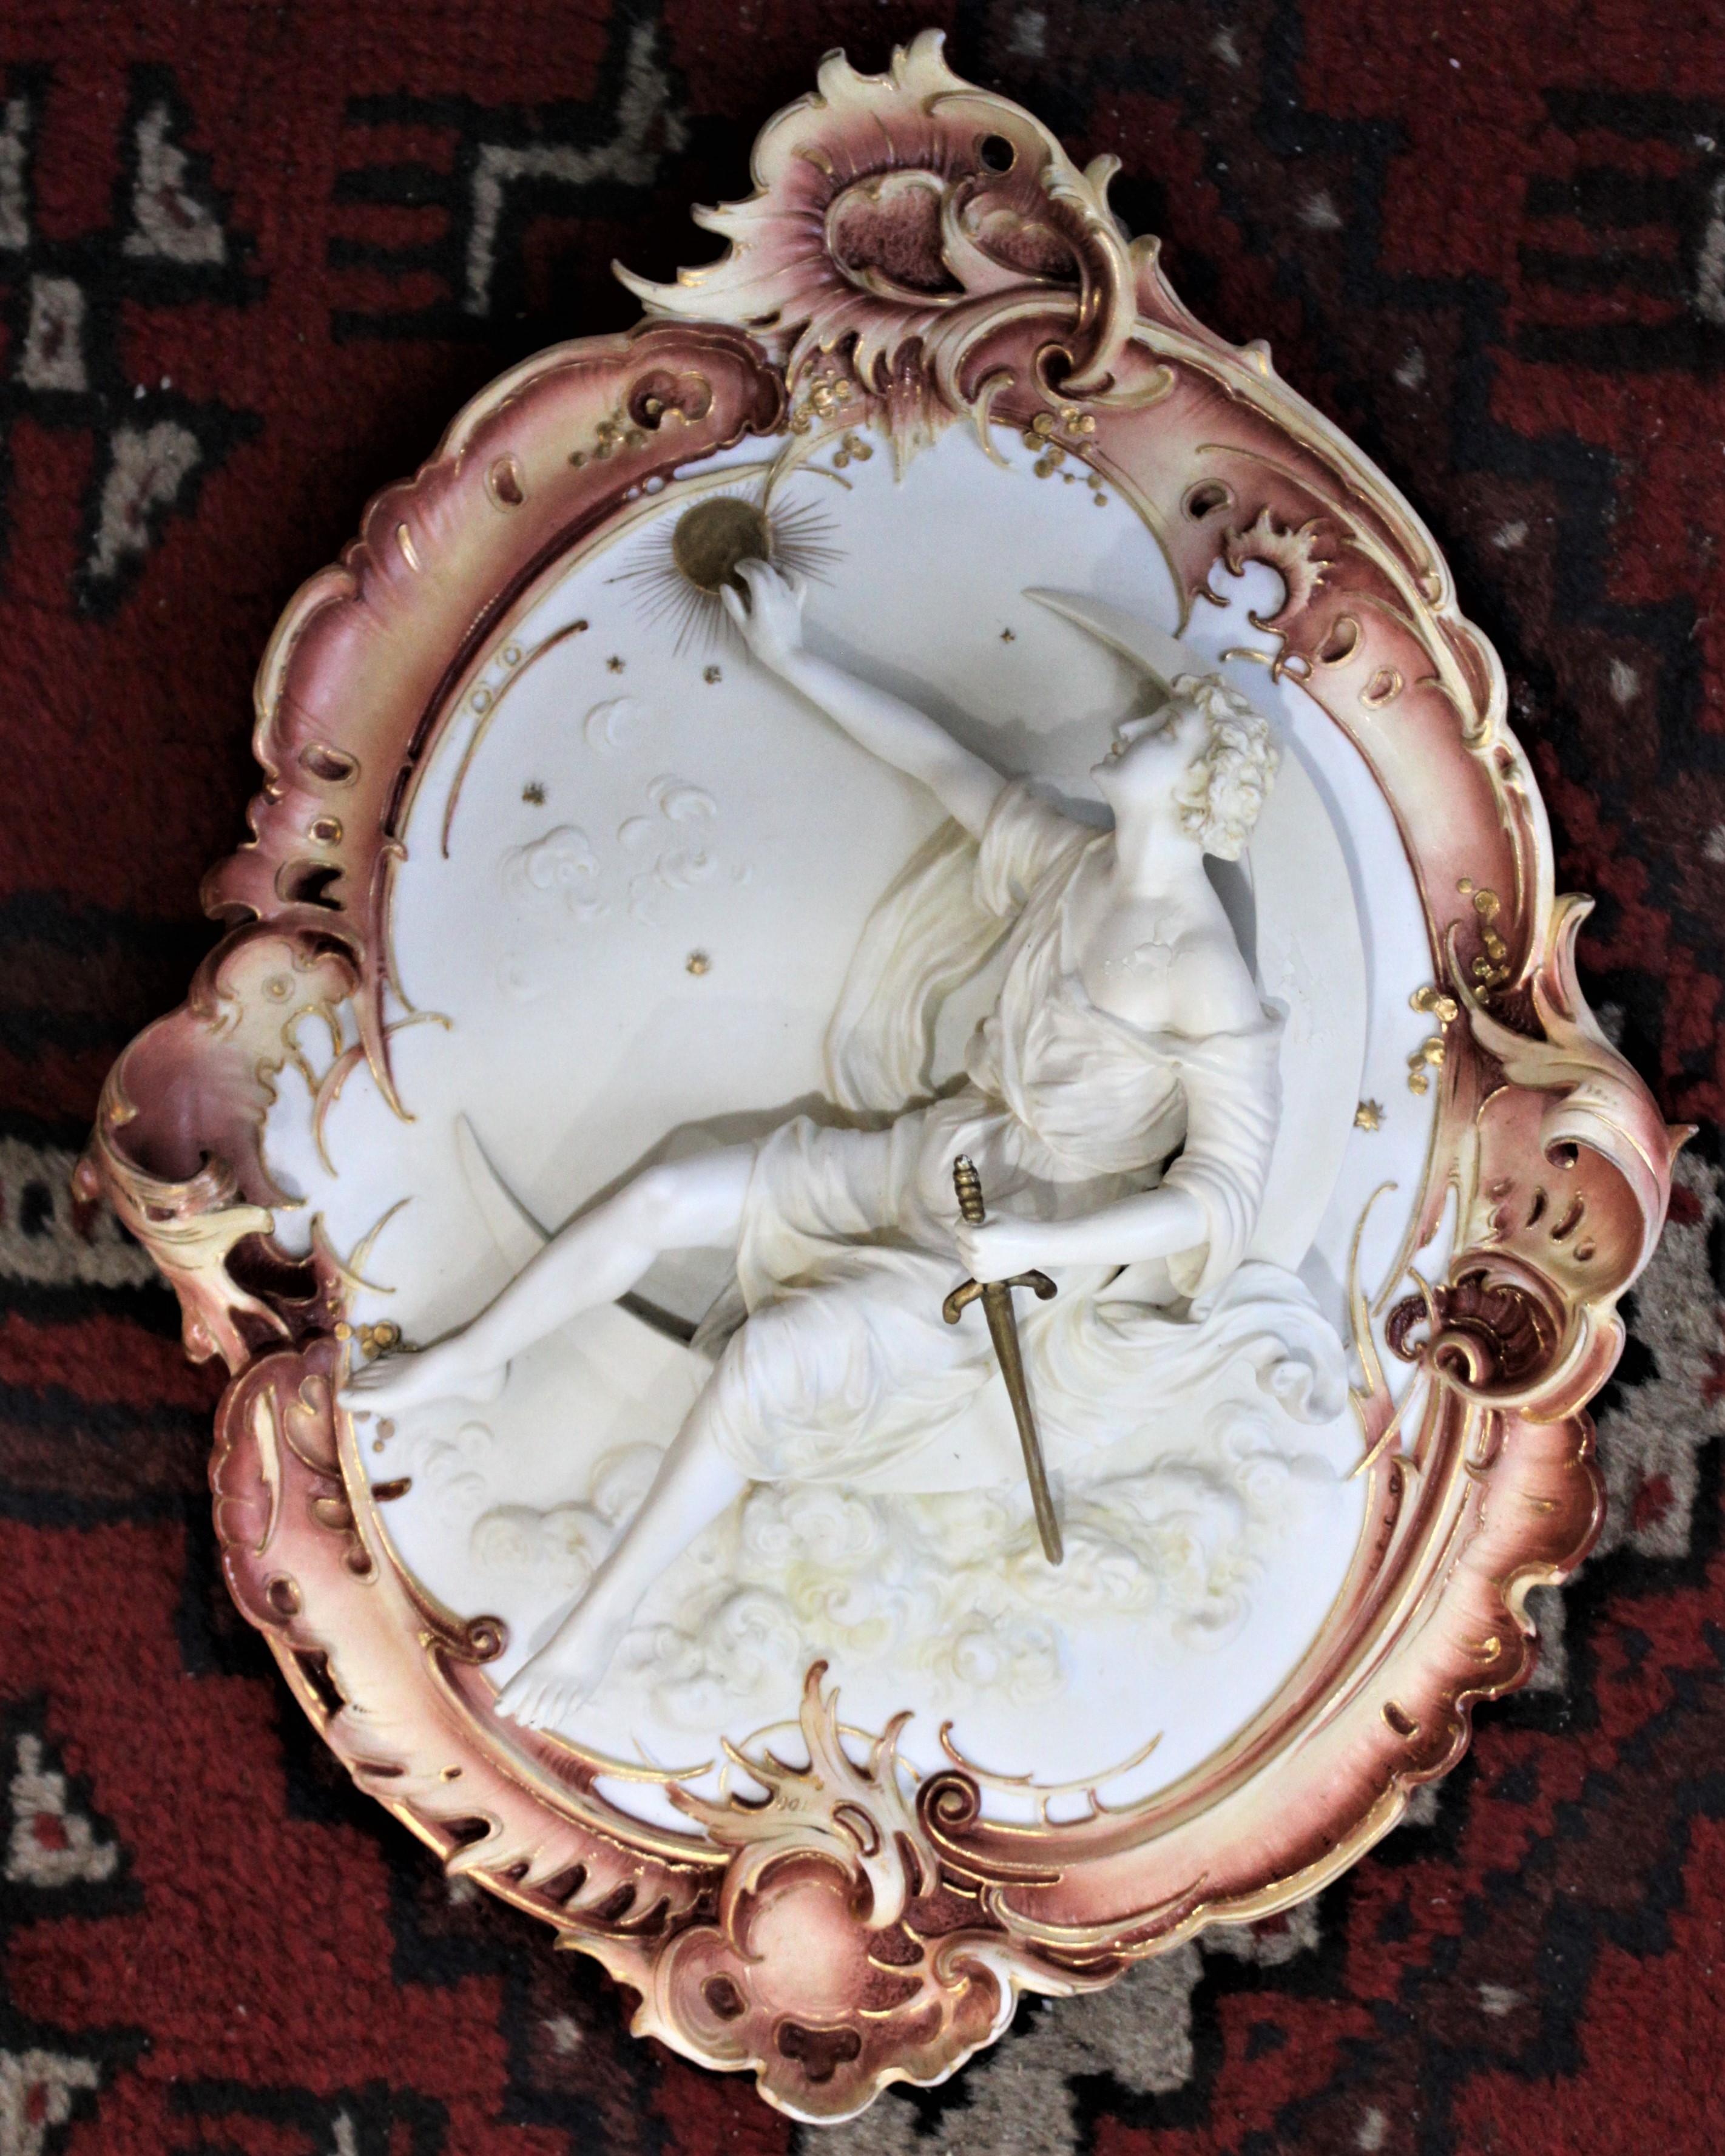 This antique wall plaque was made by the Royal Berlin Porcelain Factory in the early 1800s in an Ancient Greek Revival style. The plaque depicts a metaphorical interpretation of Helios, the God of The Sun. Helios is represented as a reclining robed